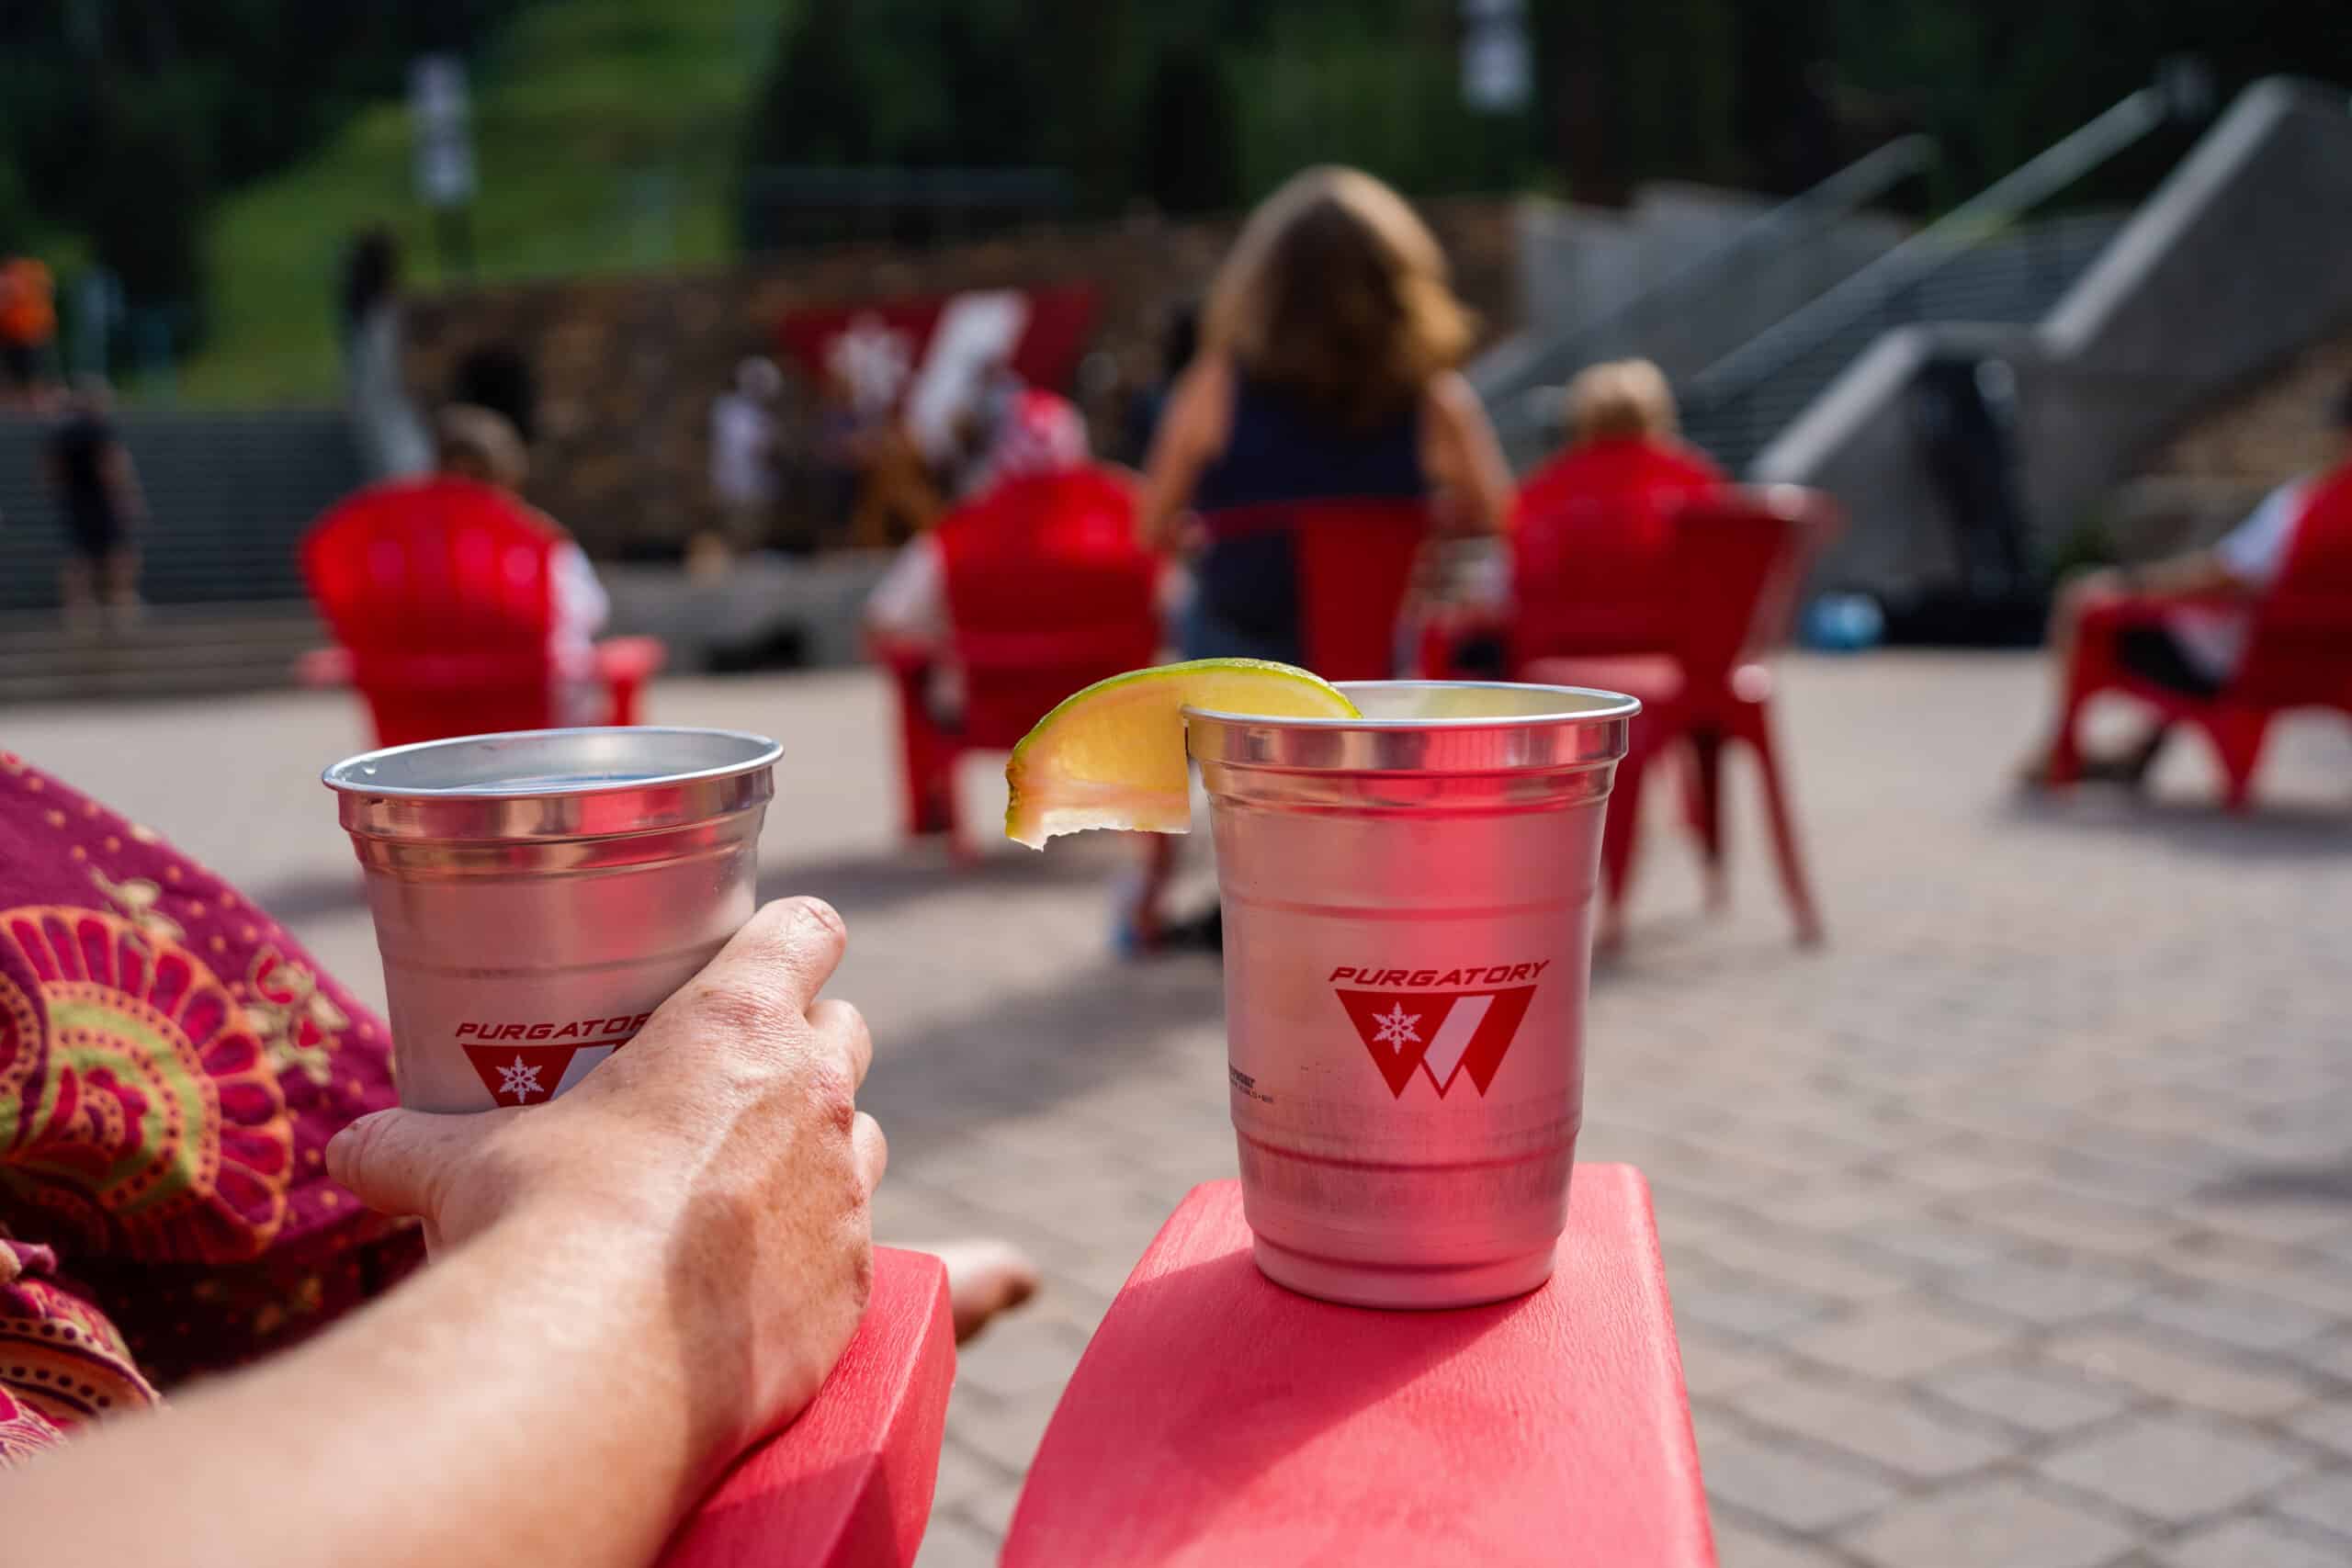 Aluminum beer cups on a red arm rest outside on the purgatory resort plaza